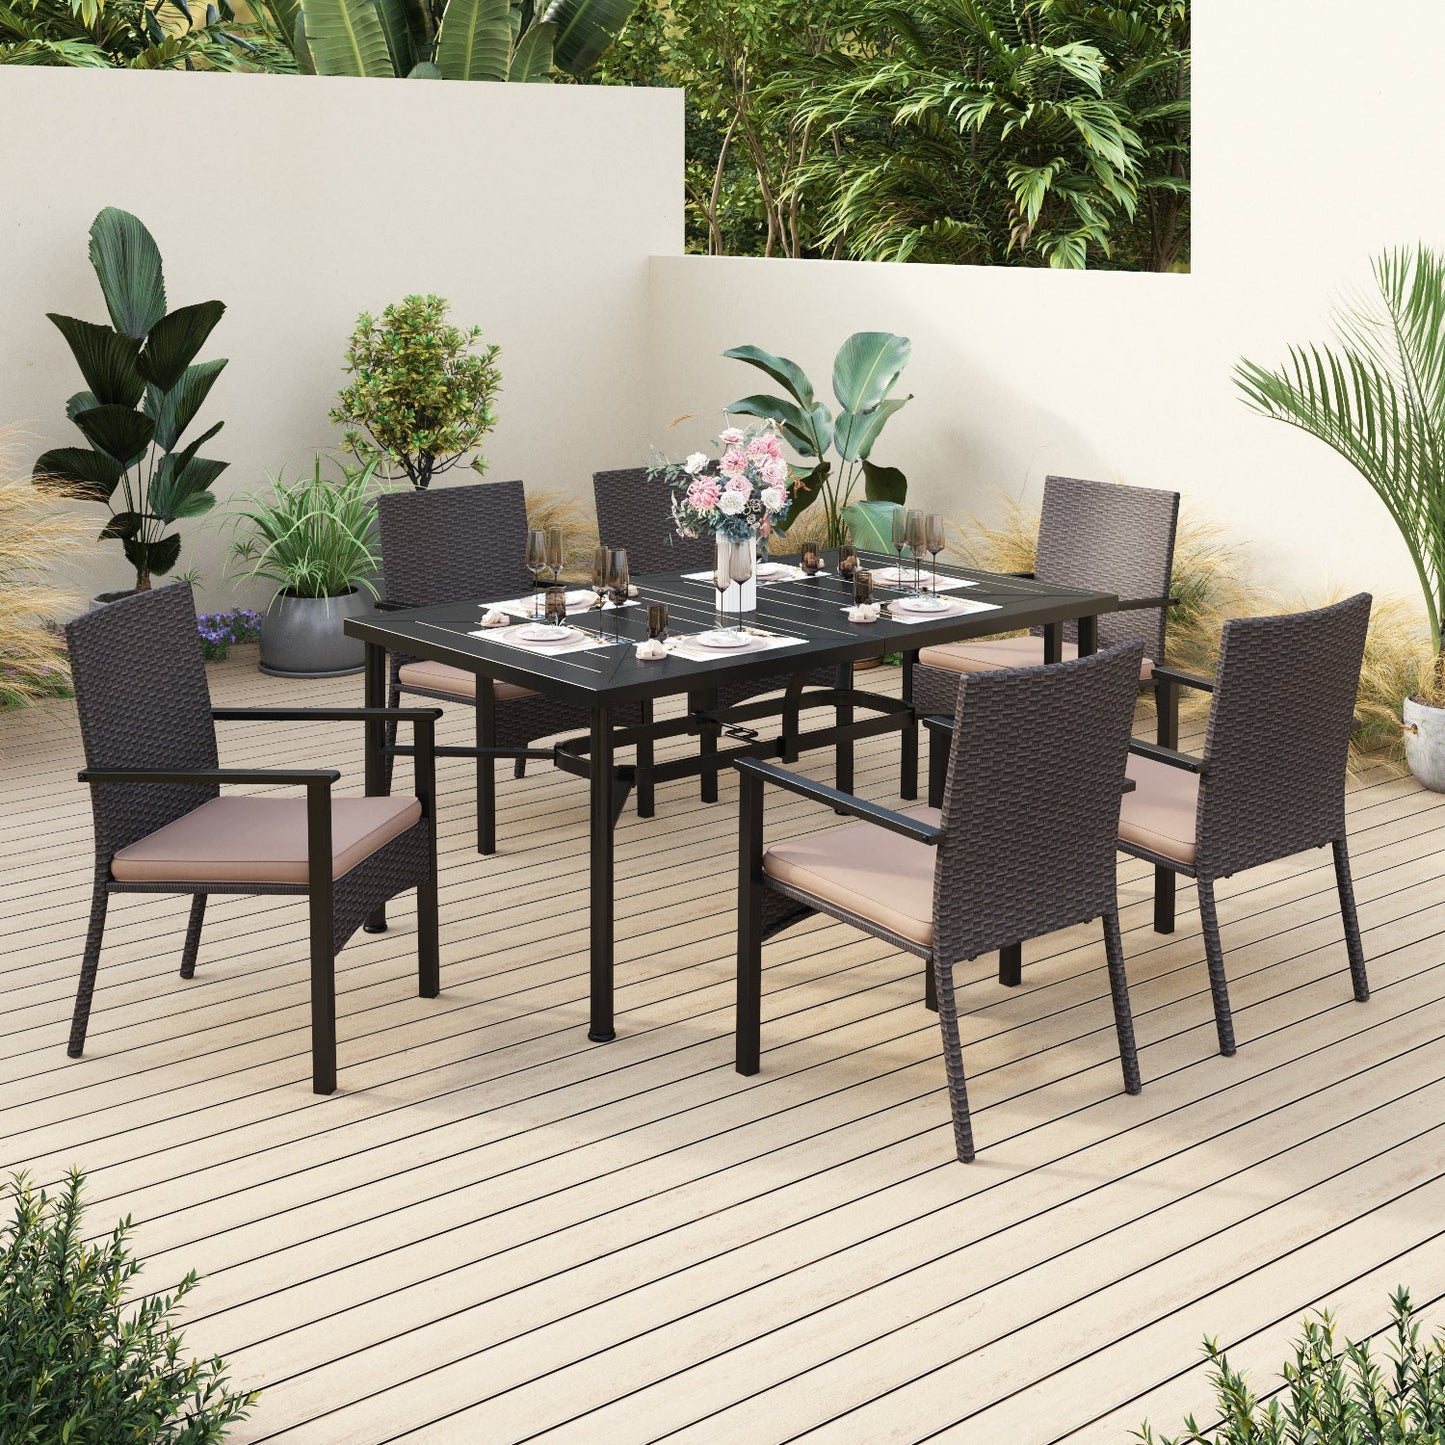 Sophia & William 7 Pieces Outdoor Patio Furniture Dining Set Dining Chairs and Metal Dining Table